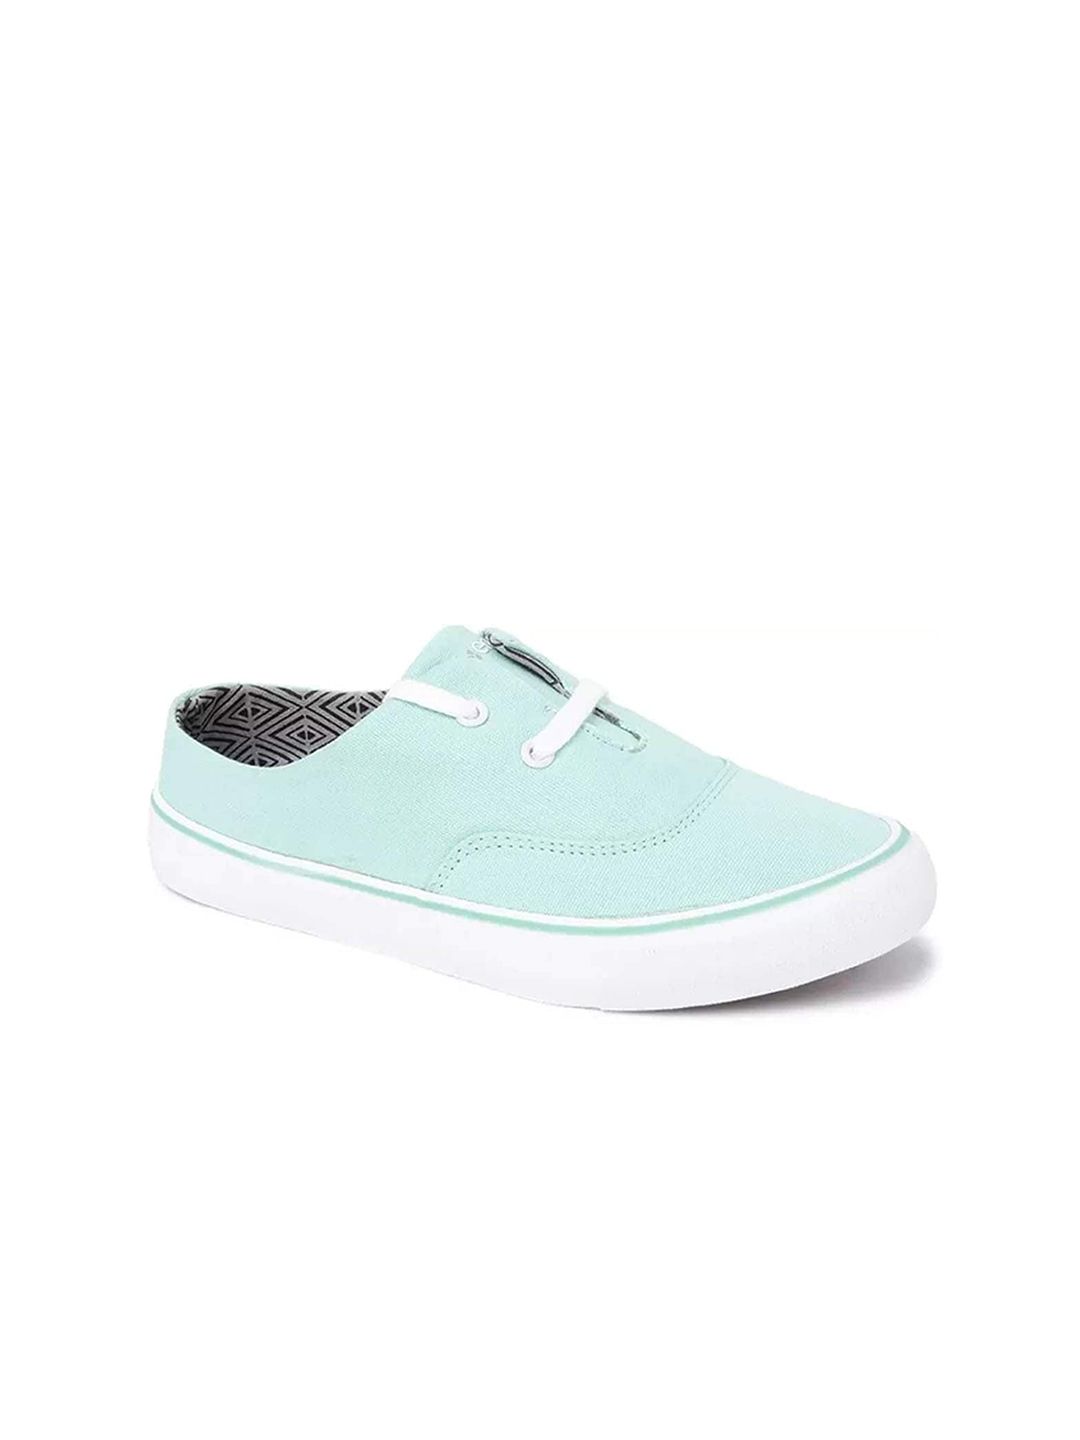 Paragon Women Canvas Mule Sneakers Price in India